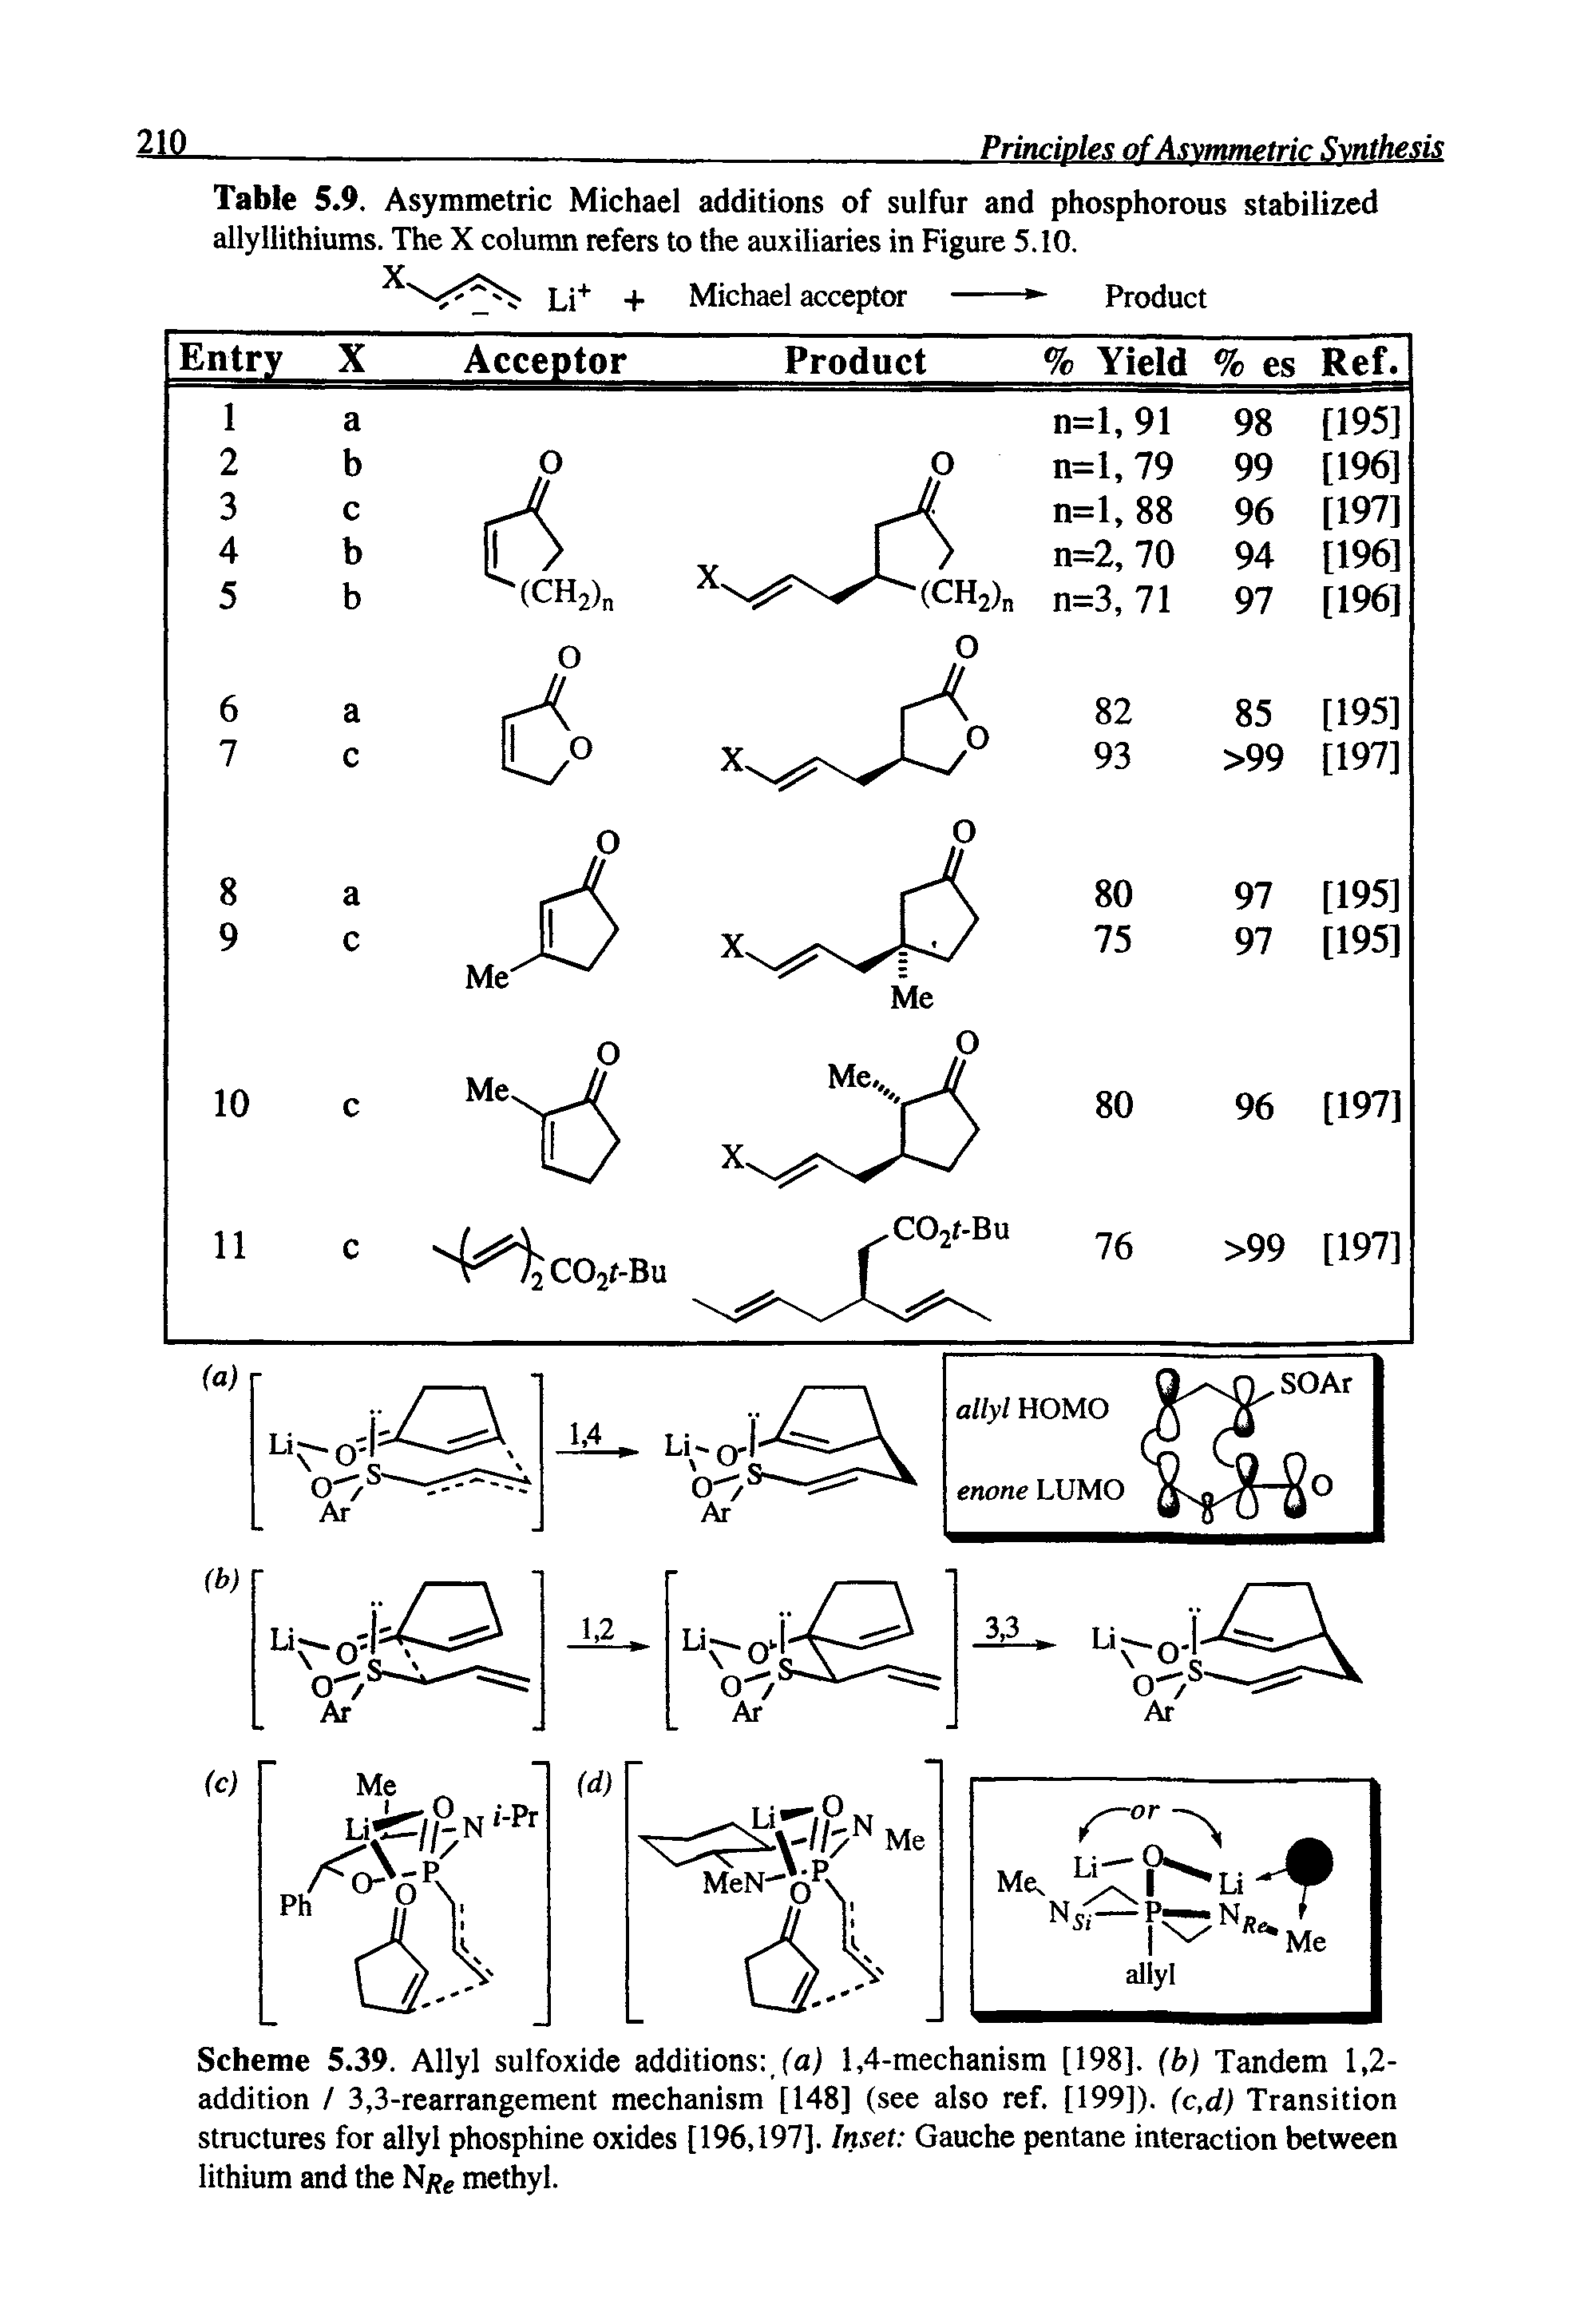 Scheme 5.39. Allyl sulfoxide additions , fa 1,4-mechanism [198]. (b) Tandem 1,2-addition / 3,3-rearrangement mechanism [148] (see also ref. [199]). (c,d) Transition structures for allyl phosphine oxides [196,197]. Inset Gauche pentane interaction between lithium and the N/je methyl.